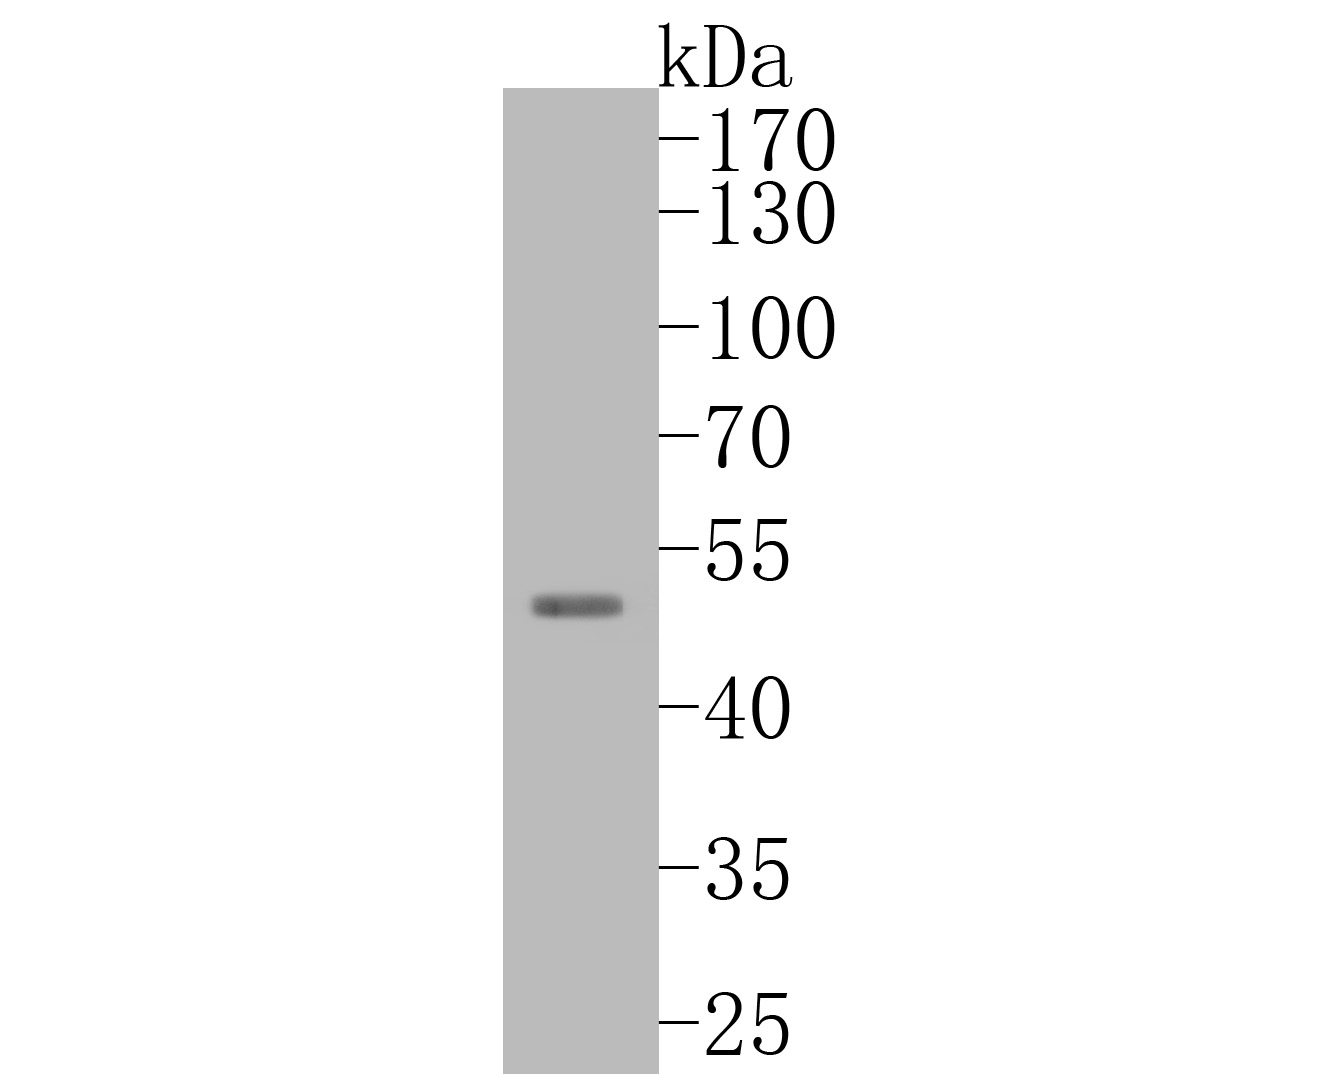 Western blot analysis of TTL on human heart tissue lysates. Proteins were transferred to a PVDF membrane and blocked with 5% BSA in PBS for 1 hour at room temperature. The primary antibody (ER2001-11, 1/500) was used in 5% BSA at room temperature for 2 hours. Goat Anti-Rabbit IgG - HRP Secondary Antibody (HA1001) at 1:5,000 dilution was used for 1 hour at room temperature.